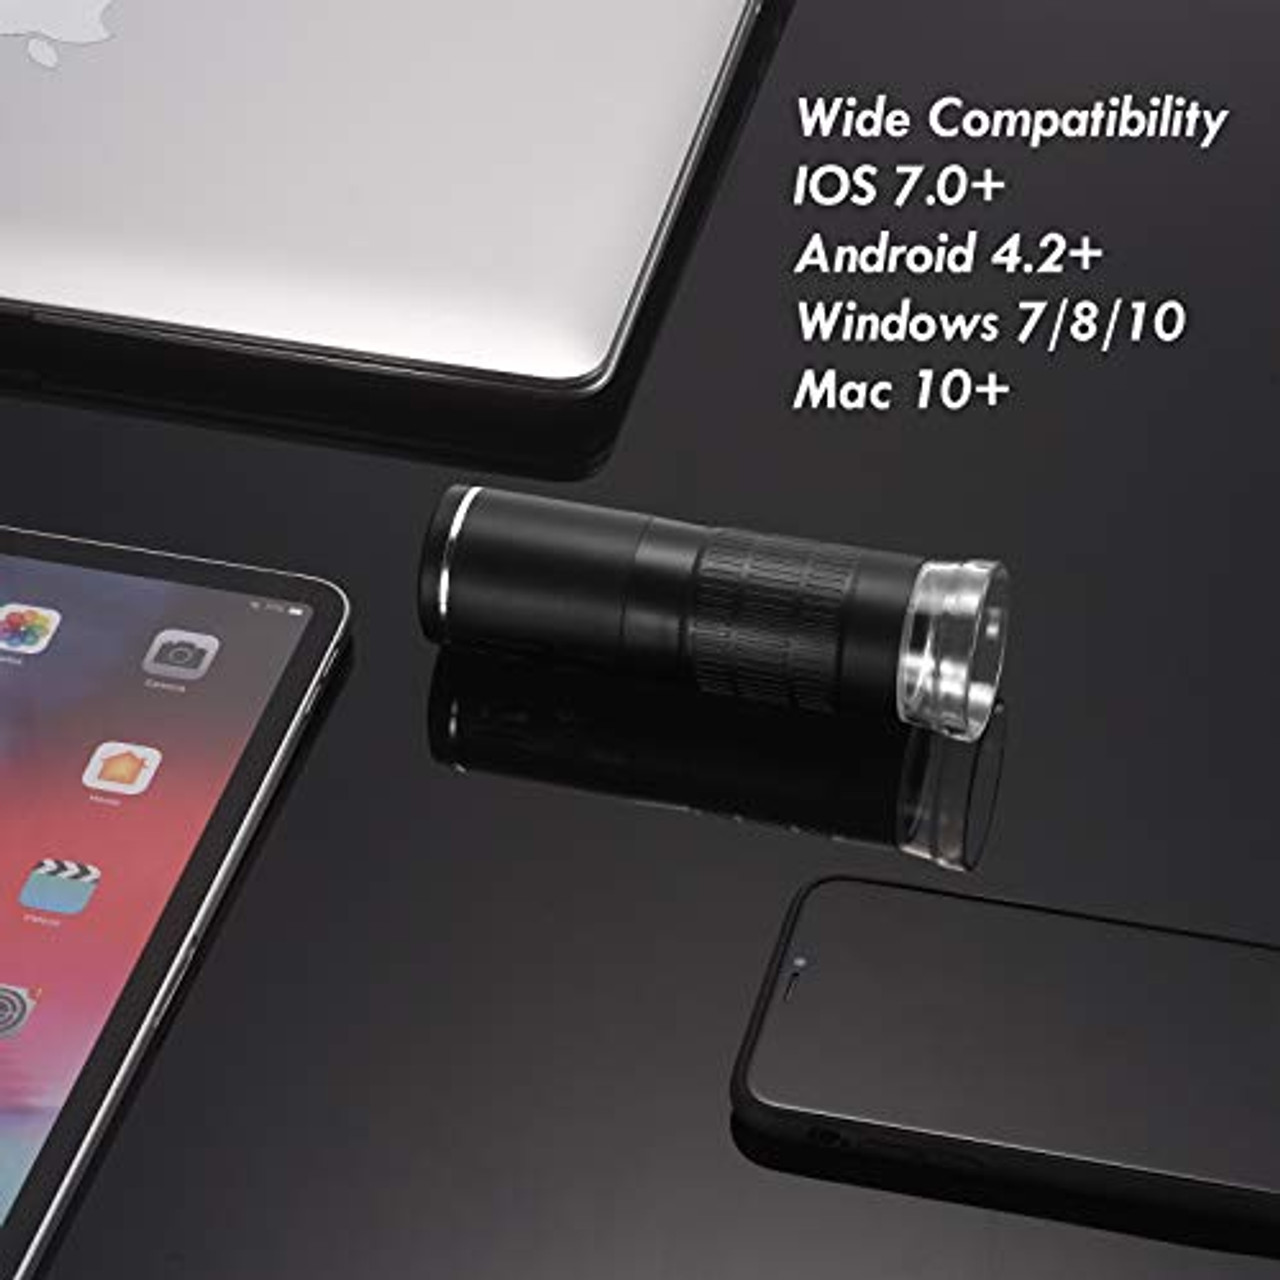 Android Smartphone 1000X Magnification Mini Handheld Endoscope Inspection Camera with 8 LEDs with Metal Stand iPad Mac Wireless Digital WiFi USB Microscope 50X Windows Compatible with iPhone 